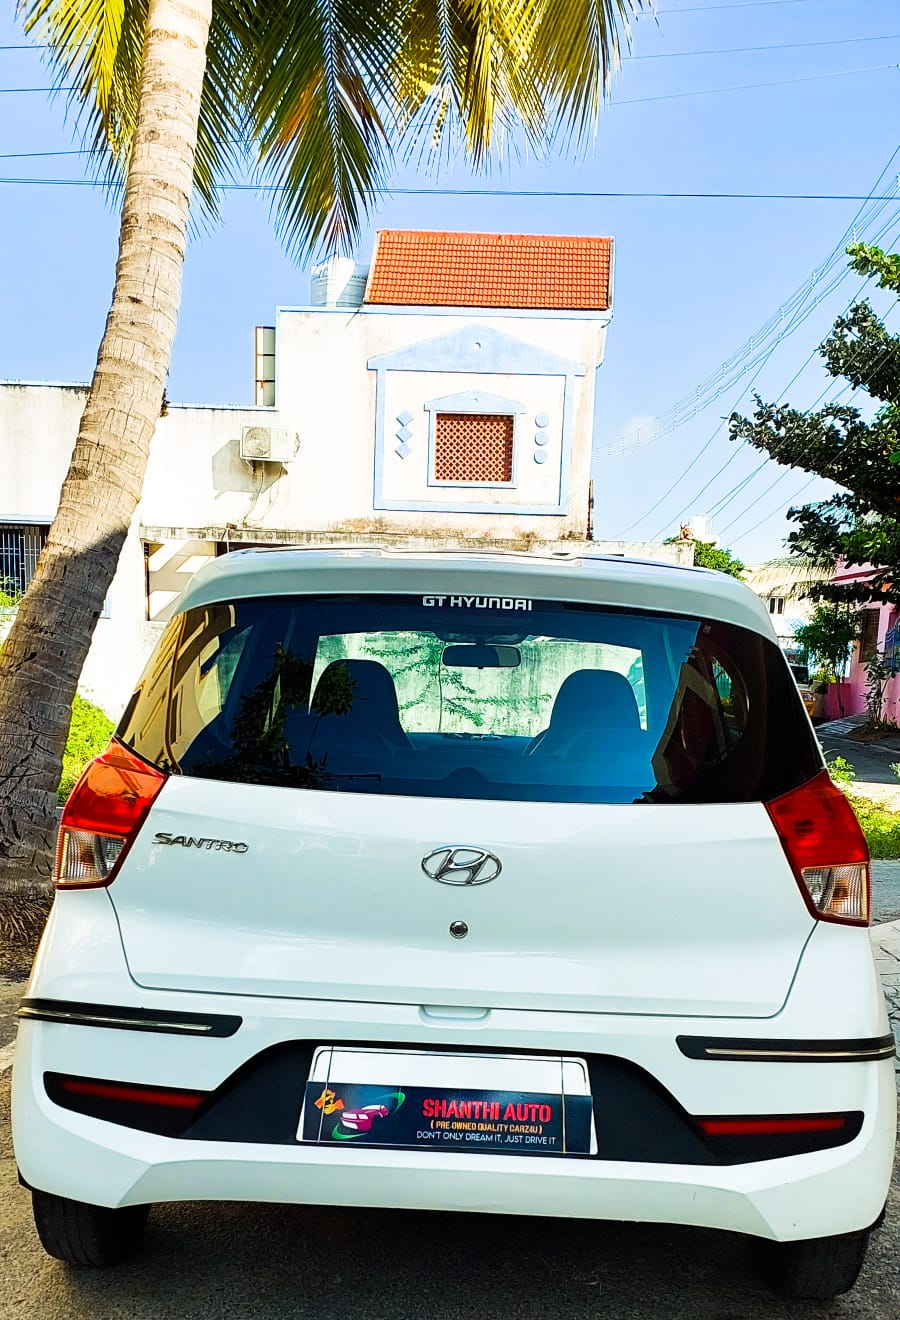 6511-for-sale-Hyundai-Santro-Petrol-First-Owner-2018-TN-registered-rs-435000